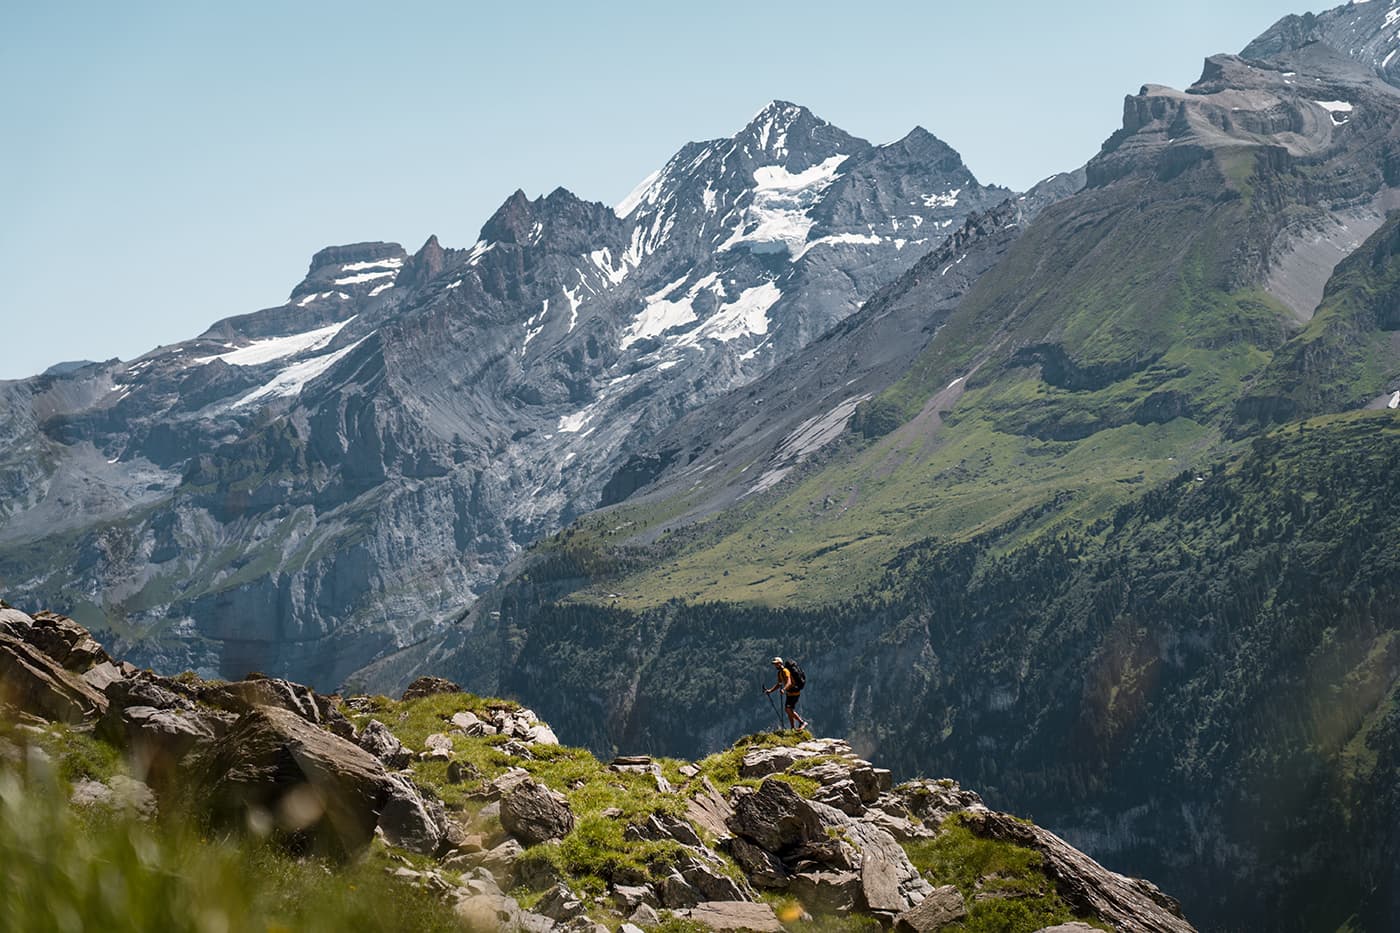 man hiking on rocky surface with mountains in background